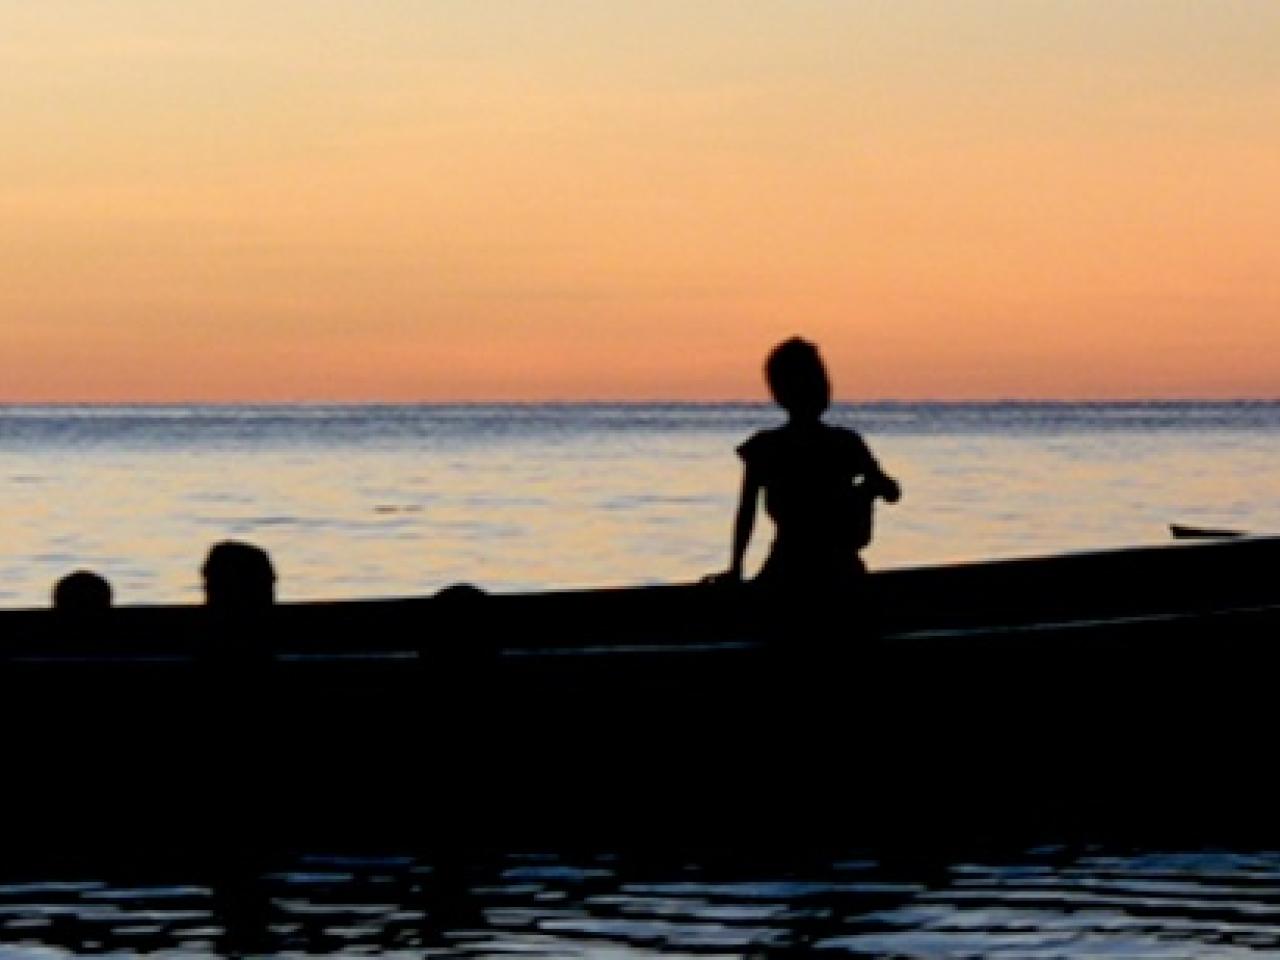 A still from the New Day film Sun Come Up. A silhouette of a large canoe in shiny, calm waters with a deep orange sunset behind. Several people’s heads at different levels show them standing or sitting in the boat. Two people on the right stand at the back of the boat with an oar. A few short buildings disrupt the mostly flat horizon.